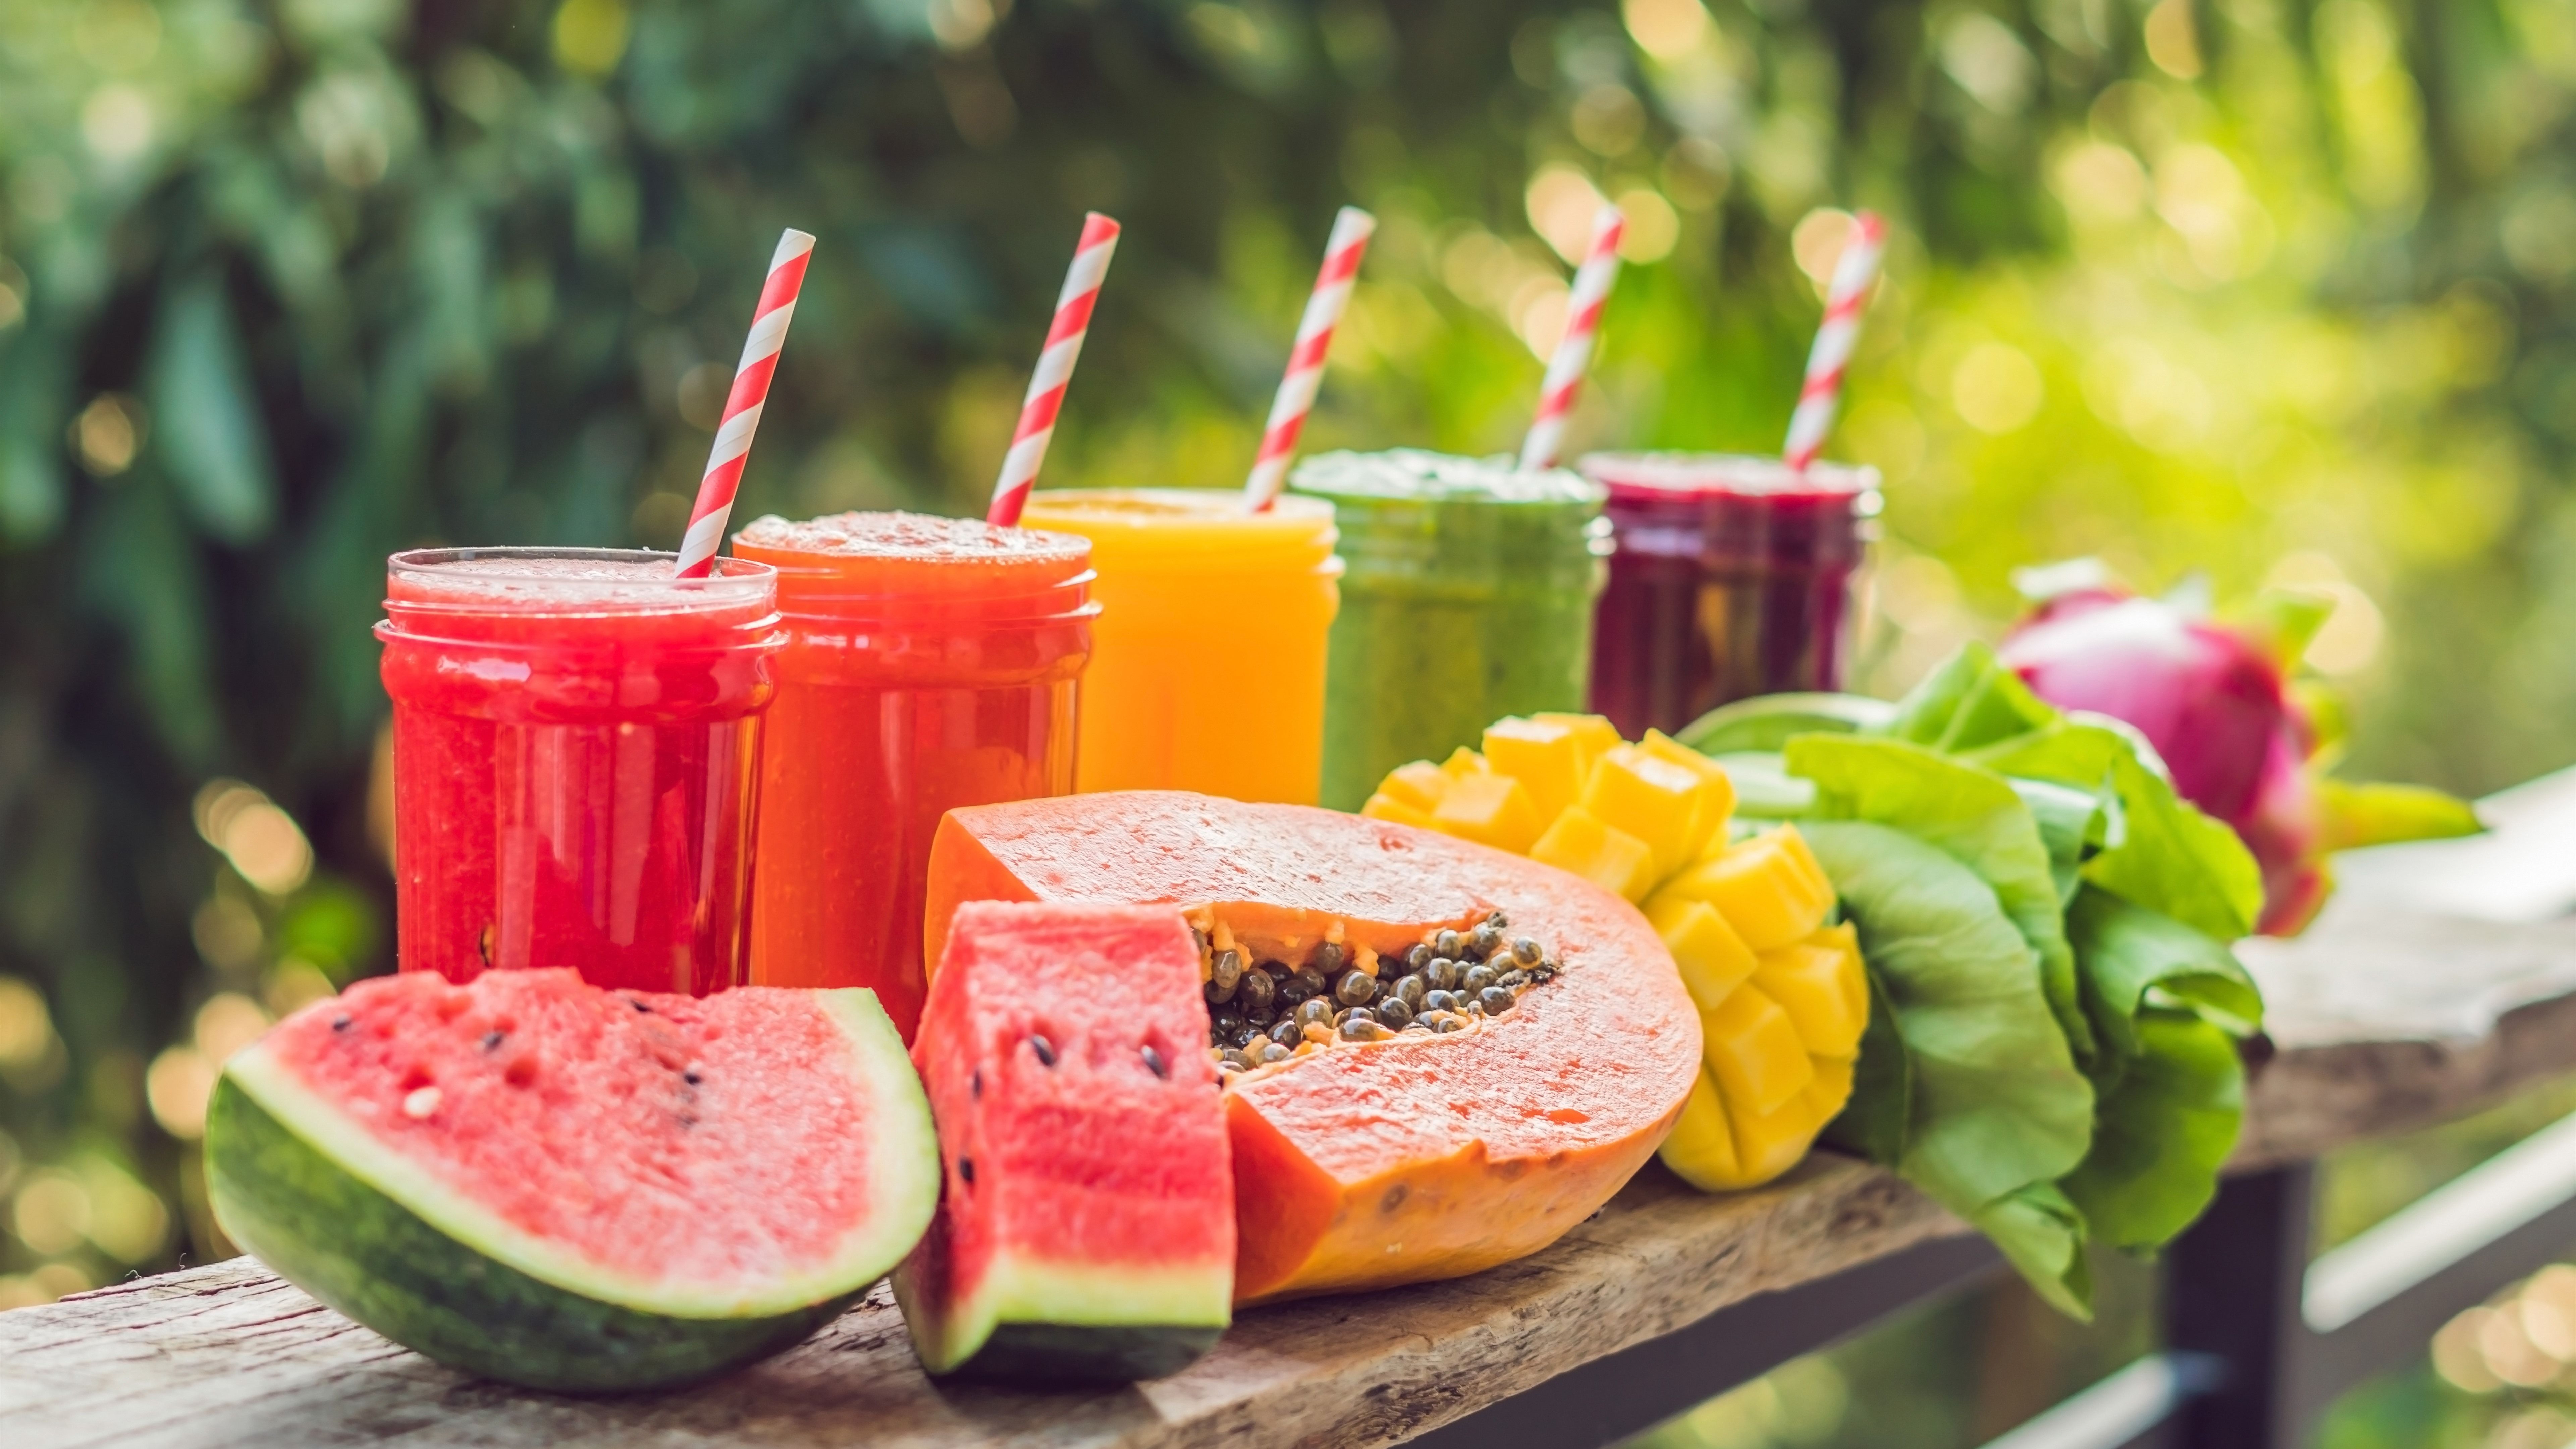 Wallpaper Summer, drinks, smoothies, watermelon, mango 7680x4320 UHD 8K Picture, Image